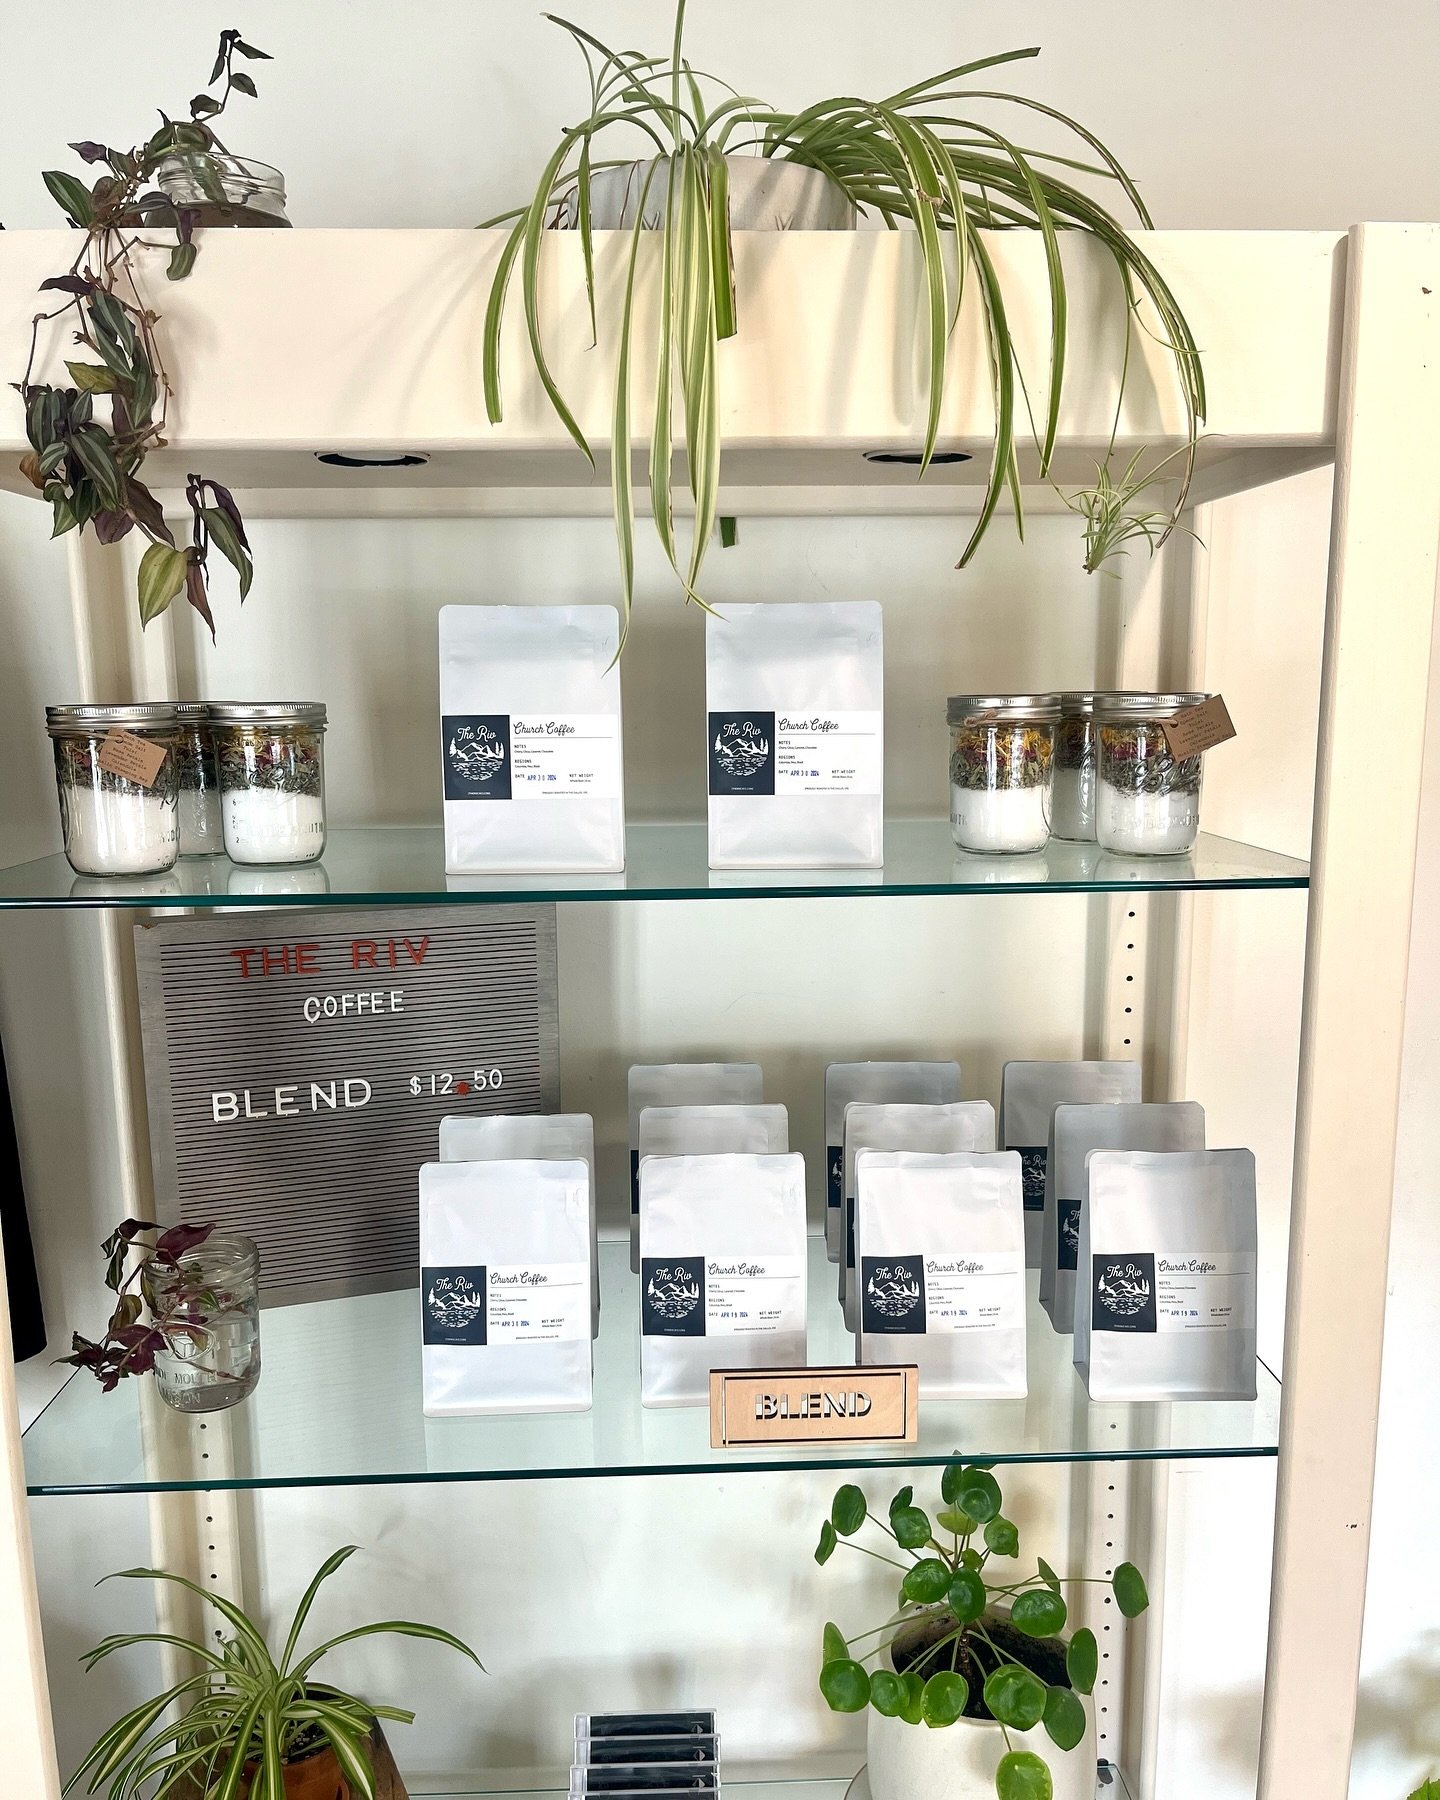 We have our coffee shelves stocked with fresh coffee! Don&rsquo;t forget to stop in this weekend to snag a bag ☕️

#coffee #theriv #cafe #specialtycoffee #specialtyroaster #yelptop100 #pnw #oregon #foodie #breakfast #brunch #lunch #coffeeshop #lunchs